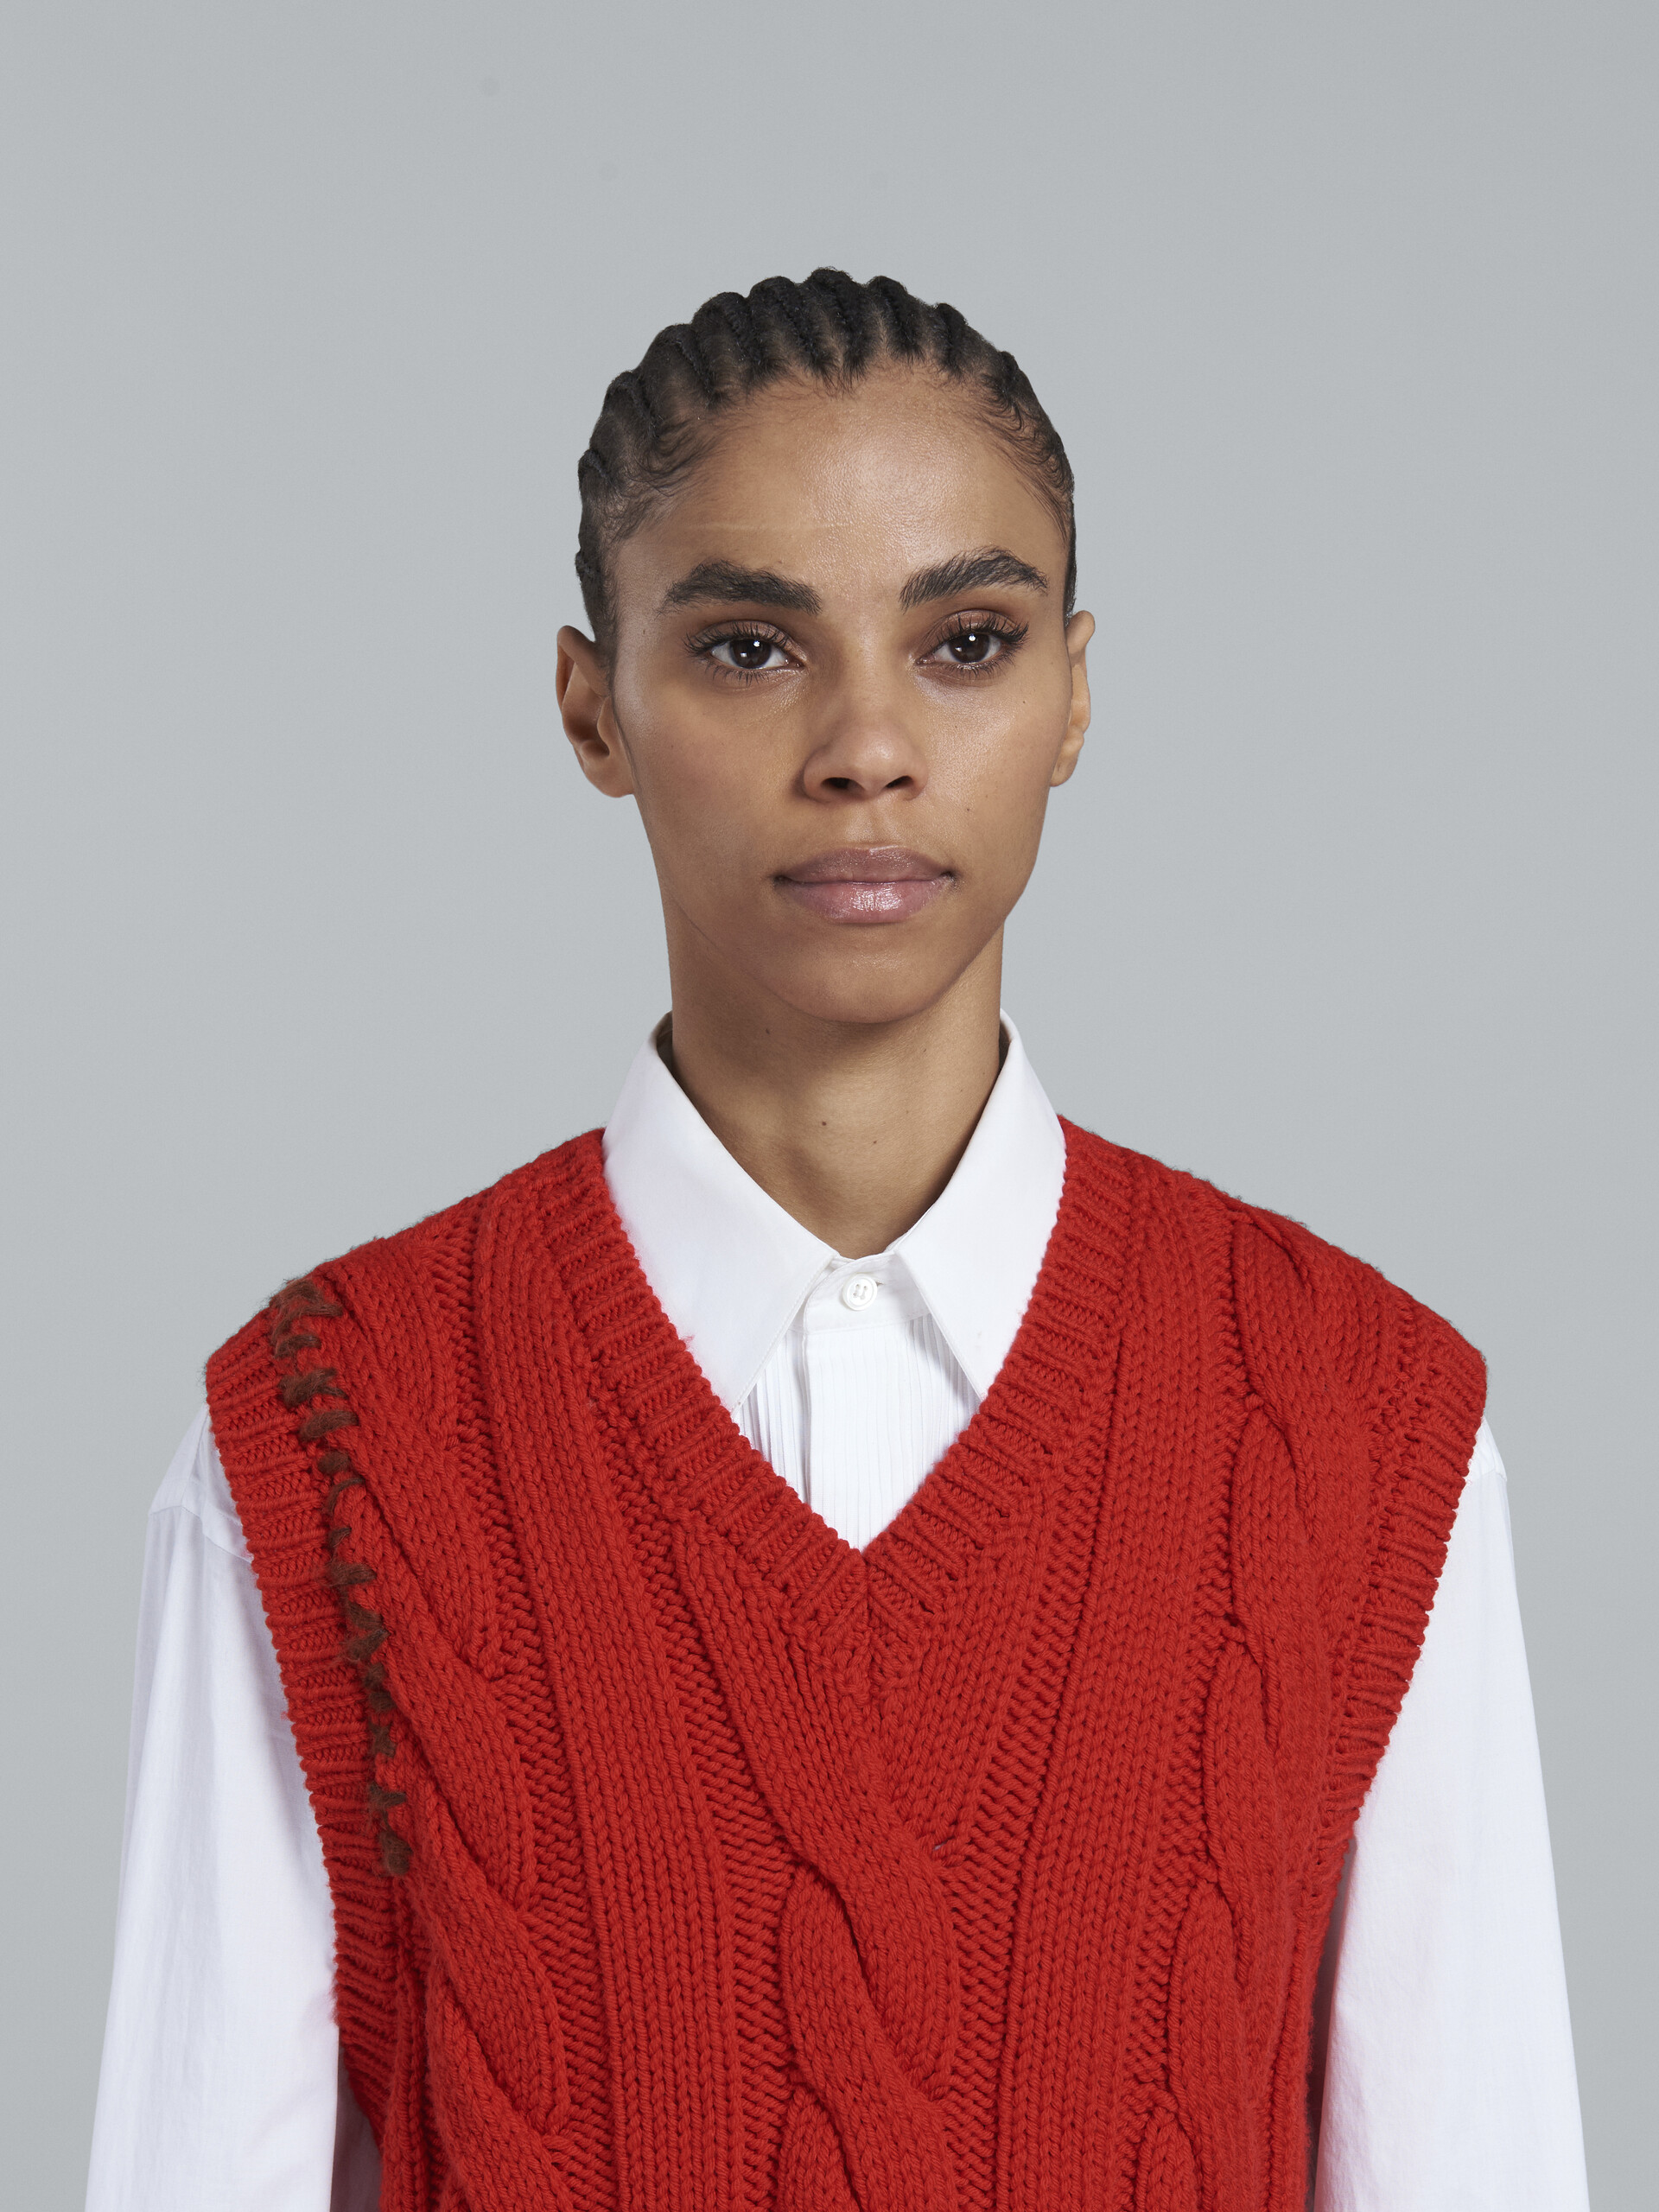 Red cable-knit vest - Pullovers - Image 4